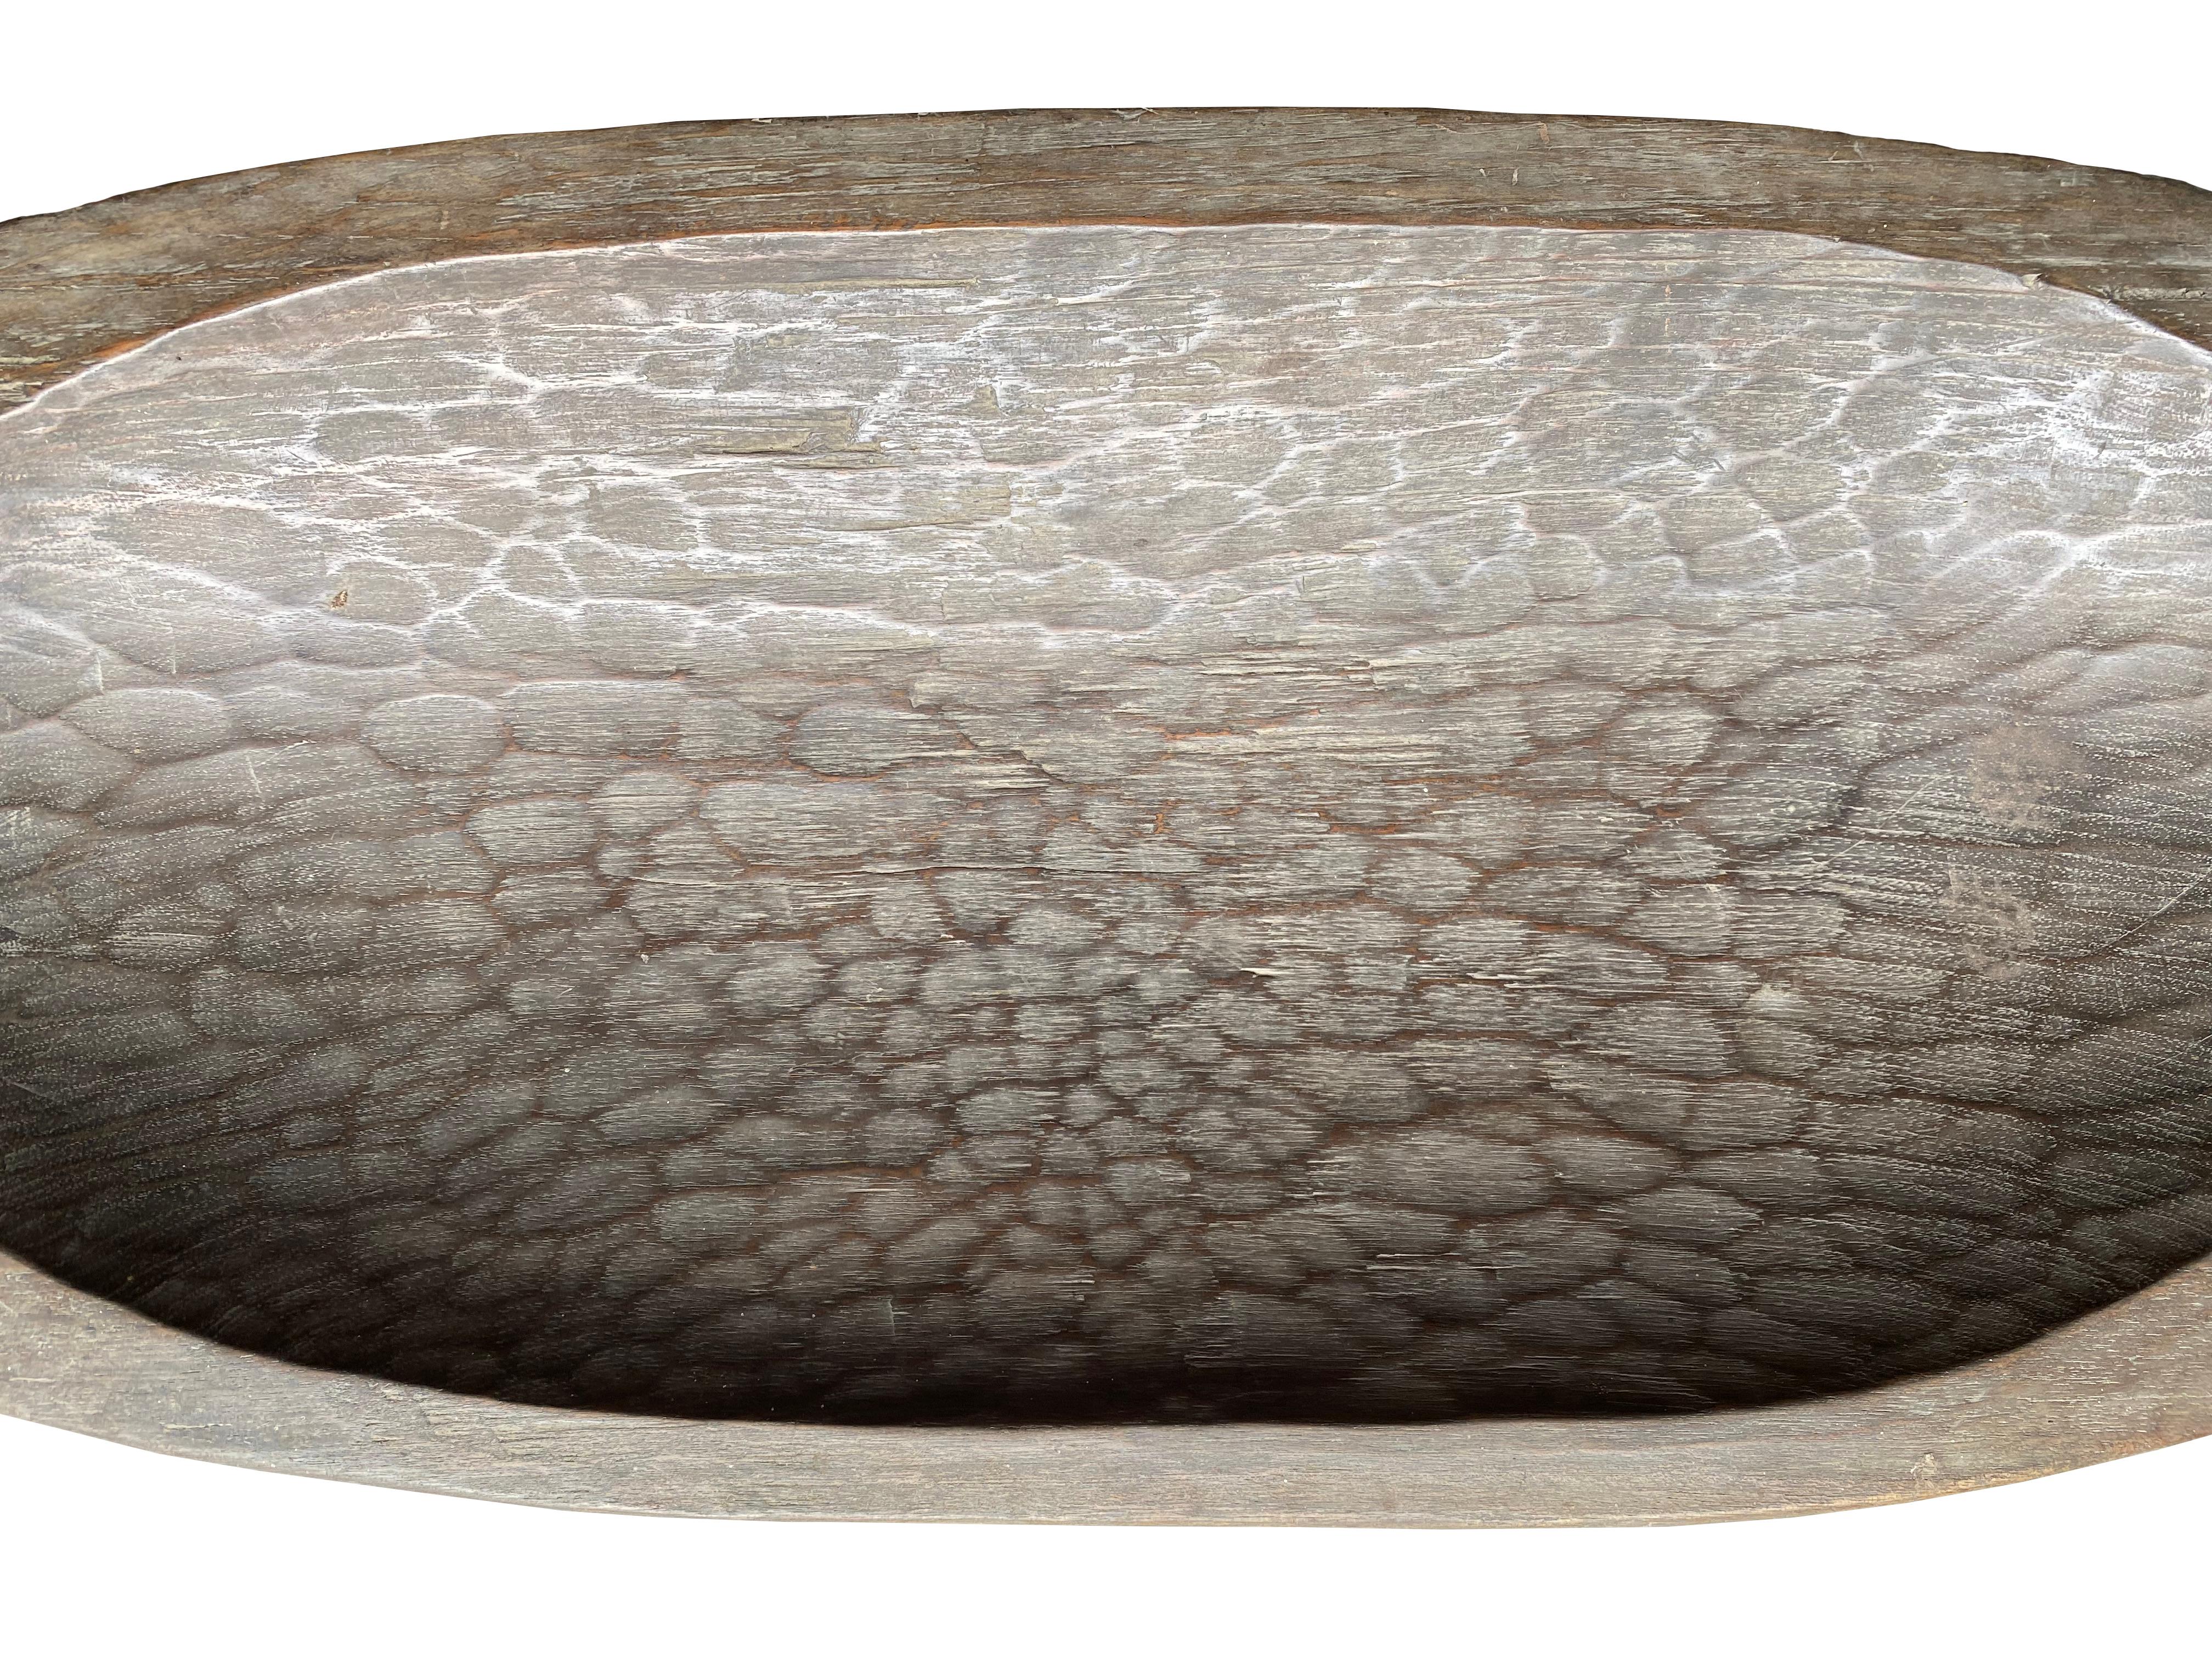 This hand-carved tray comes from the Mentawai tribe found on the Mentawai Islands off the west coast, Sumatra, Indonesia. They are hand-carved from a single block of wood. Sought after for their beautiful hand-carved textures and shallow elongated